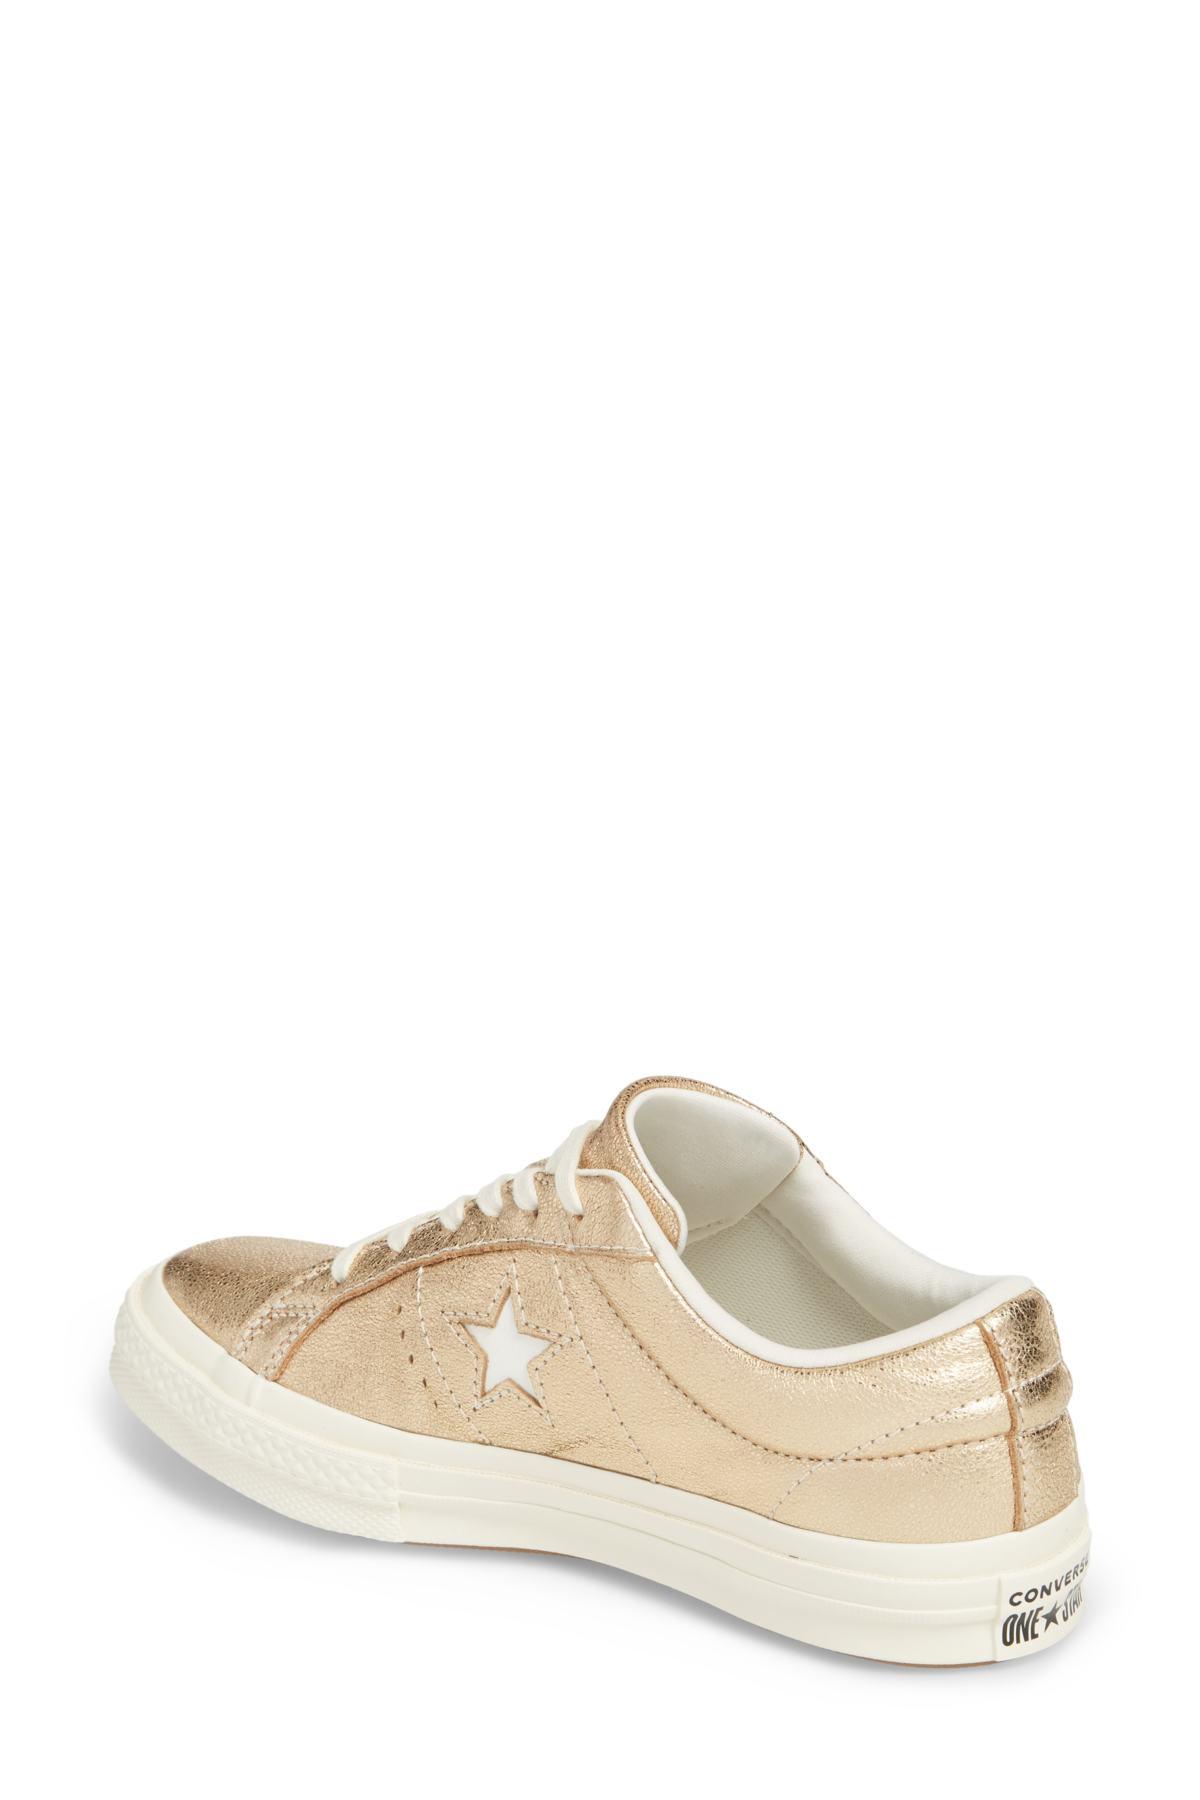 Converse Leather One Star Ox Women's Shoes (trainers) In Gold in Gold  Leather (Metallic) | Lyst